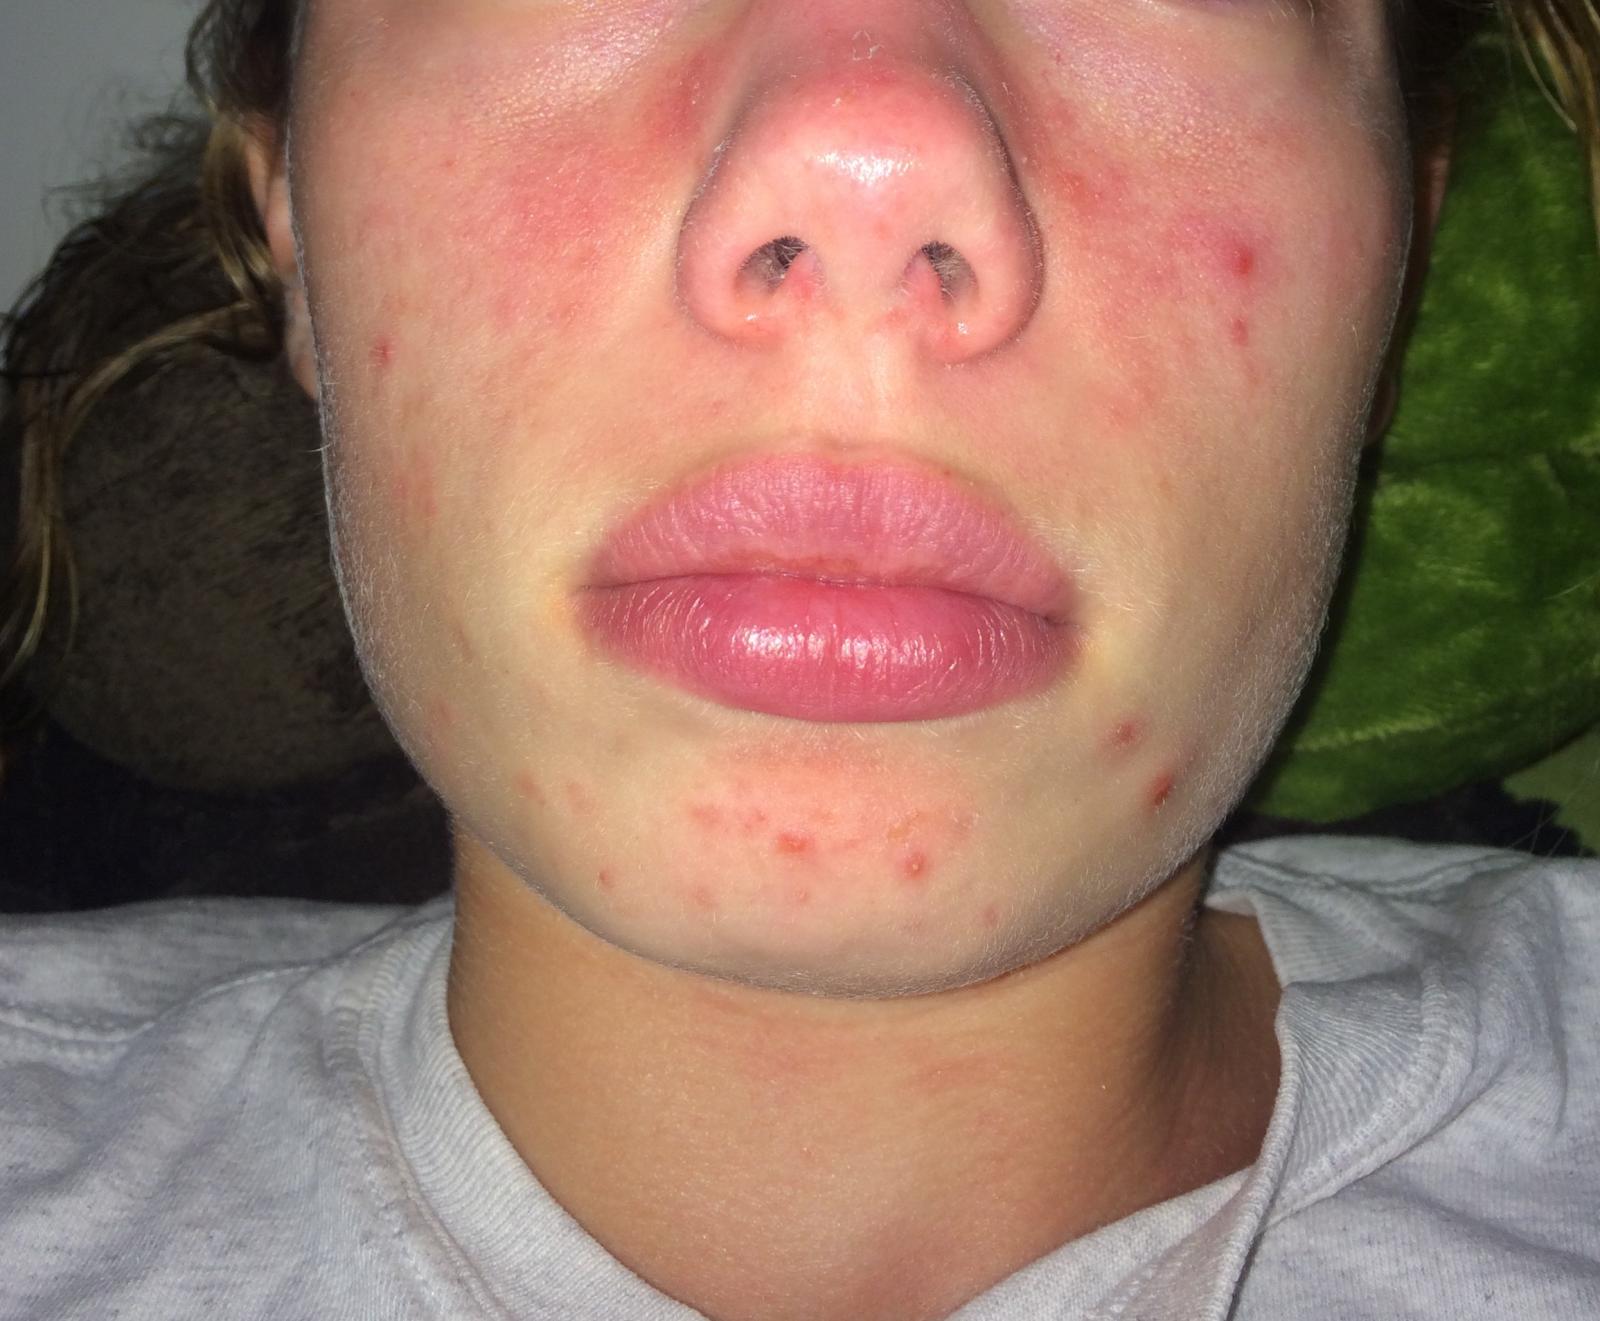 What Age Is Acne The Worst